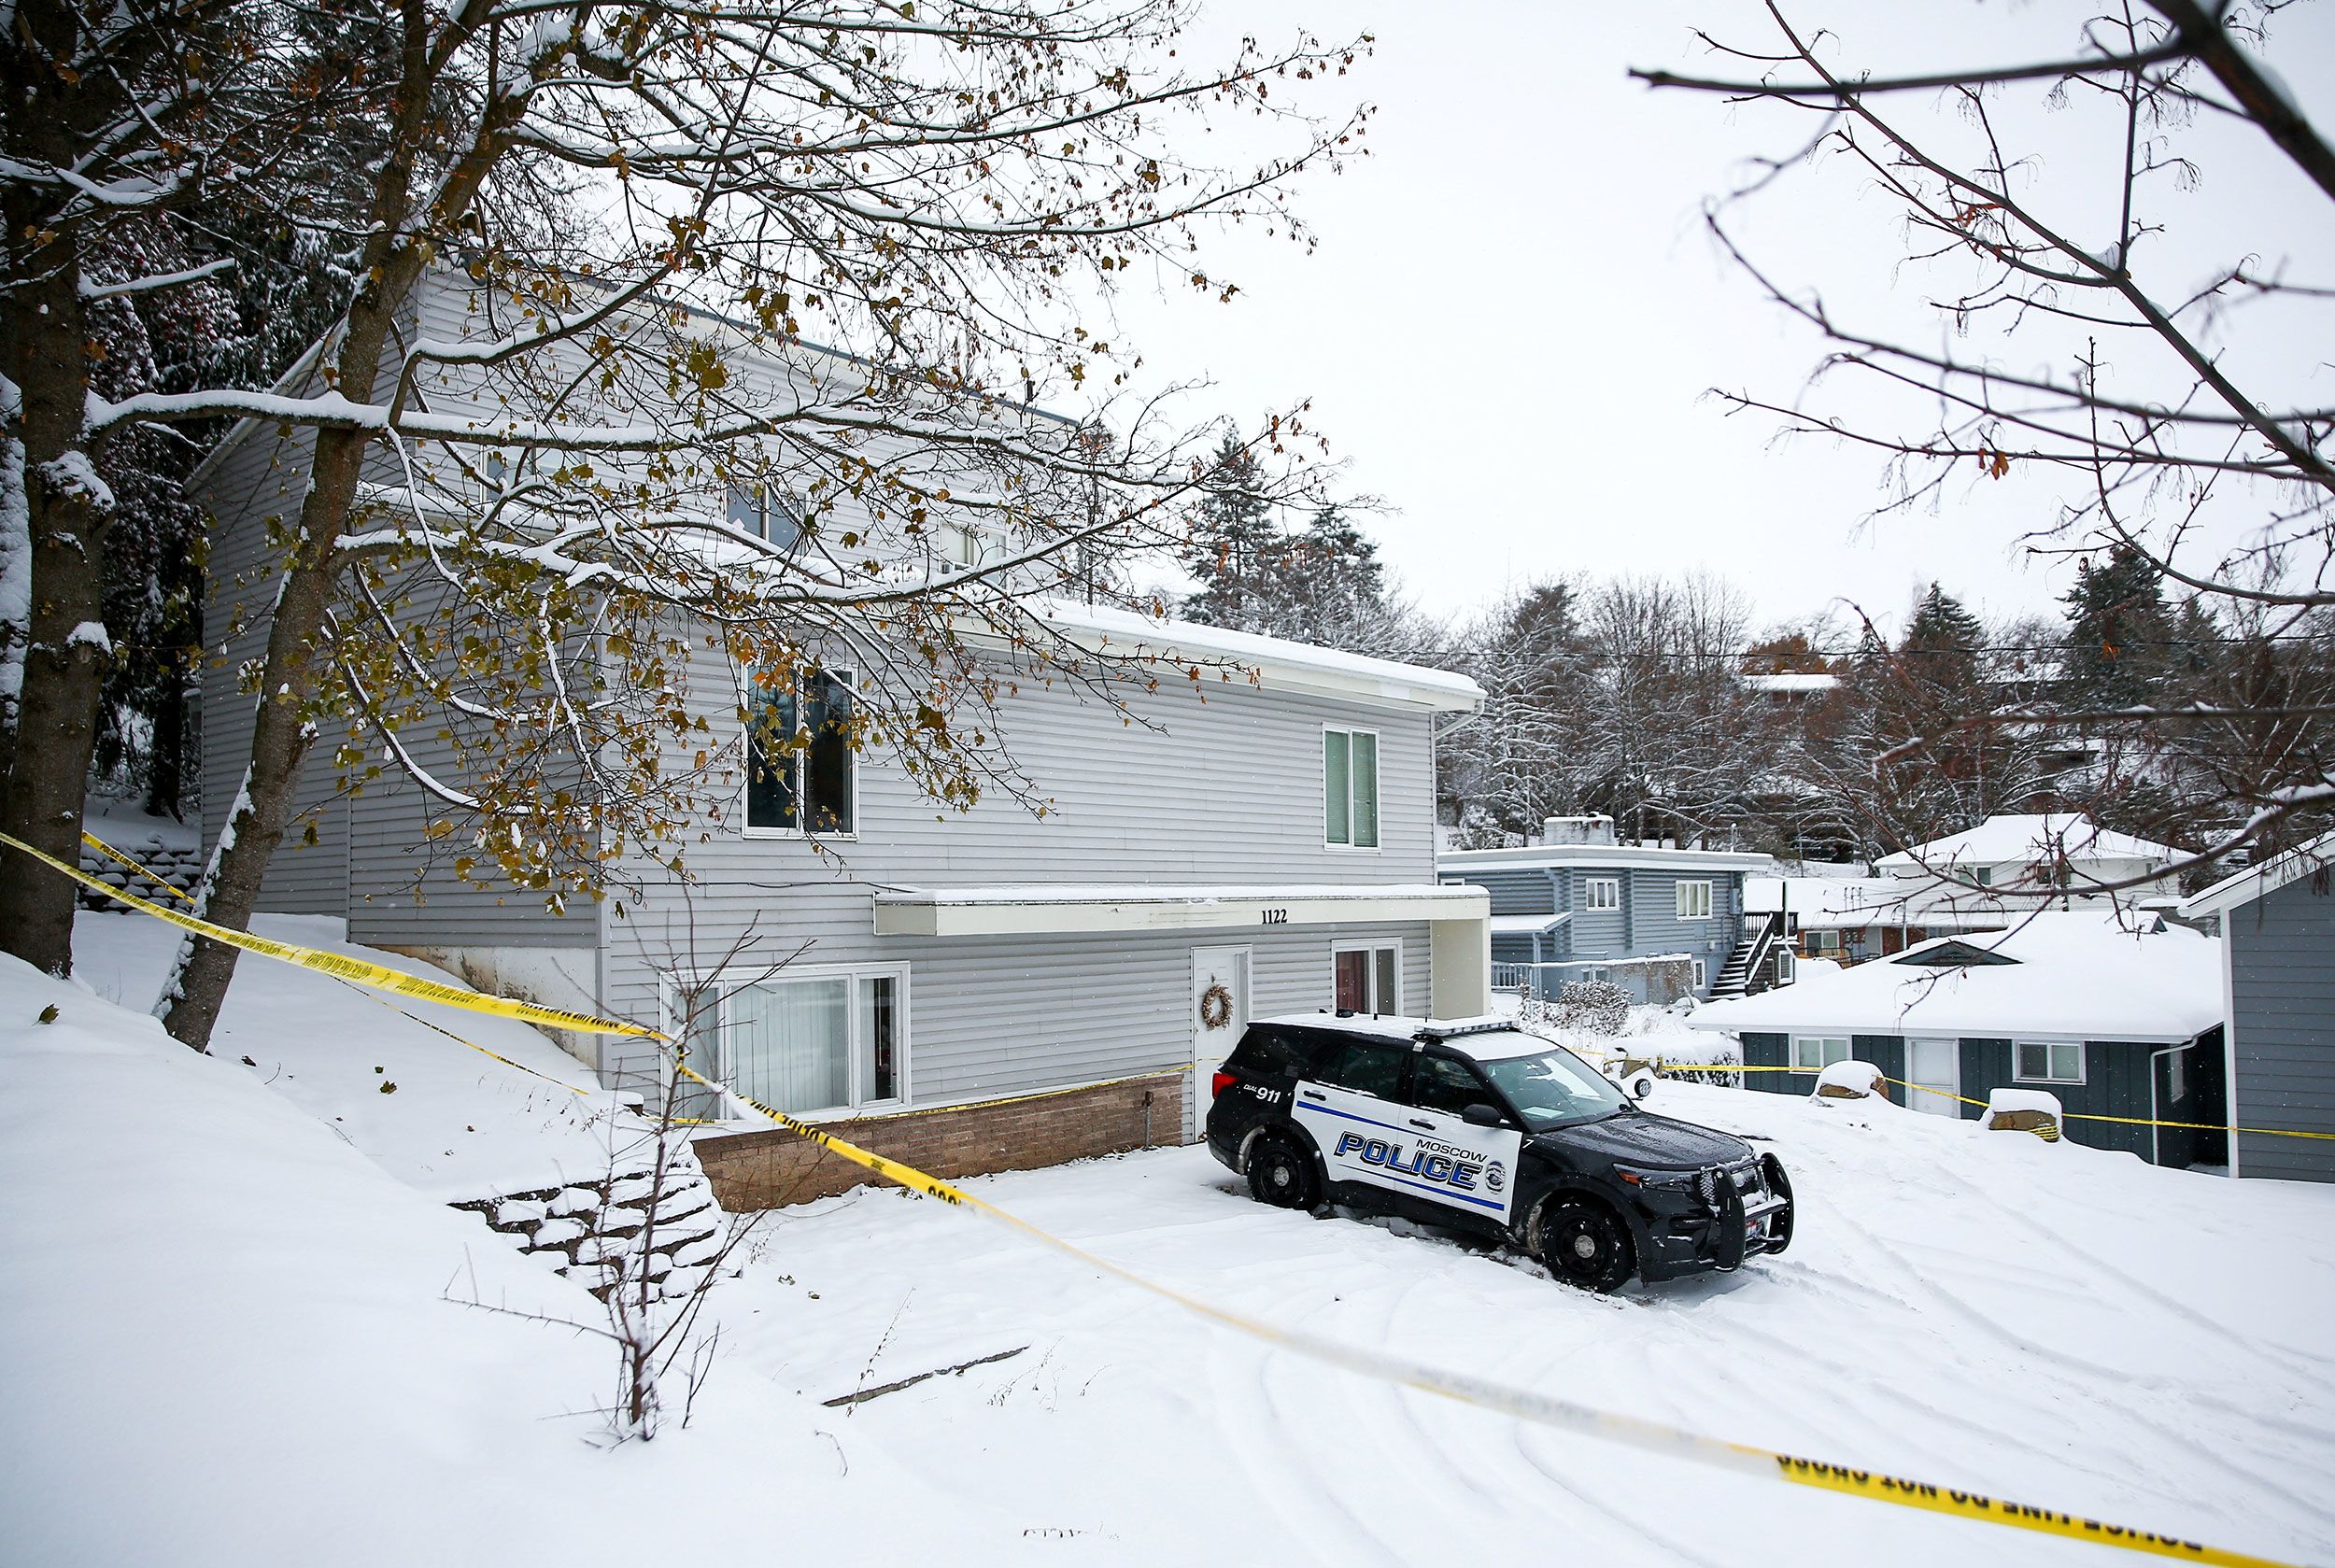 Idaho murders: Inside the off-campus house where 4 students were killed